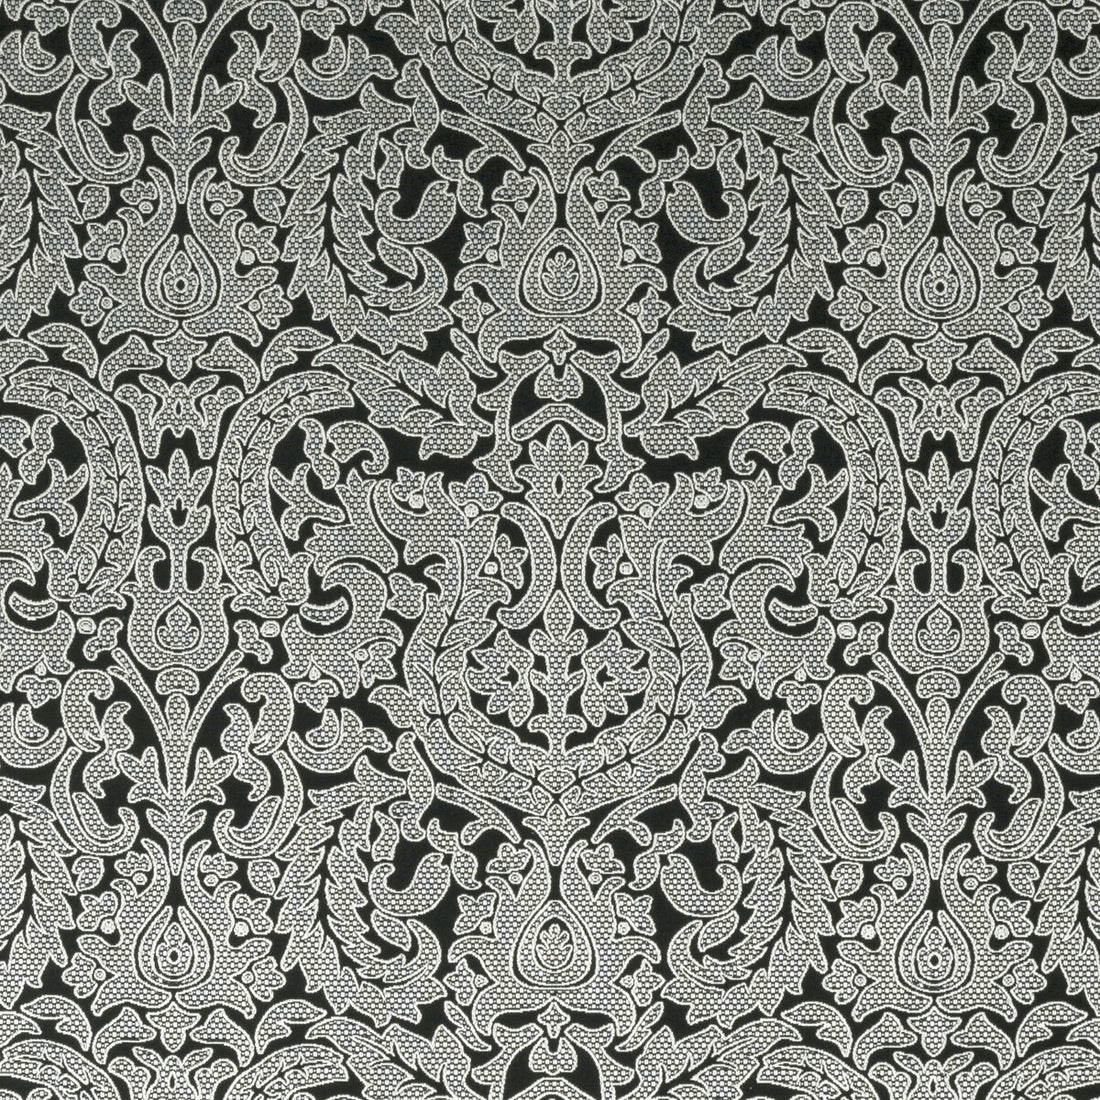 Bw1020 fabric in black/white color - pattern F0893/01.CAC.0 - by Clarke And Clarke in the Clarke &amp; Clarke Black + White collection